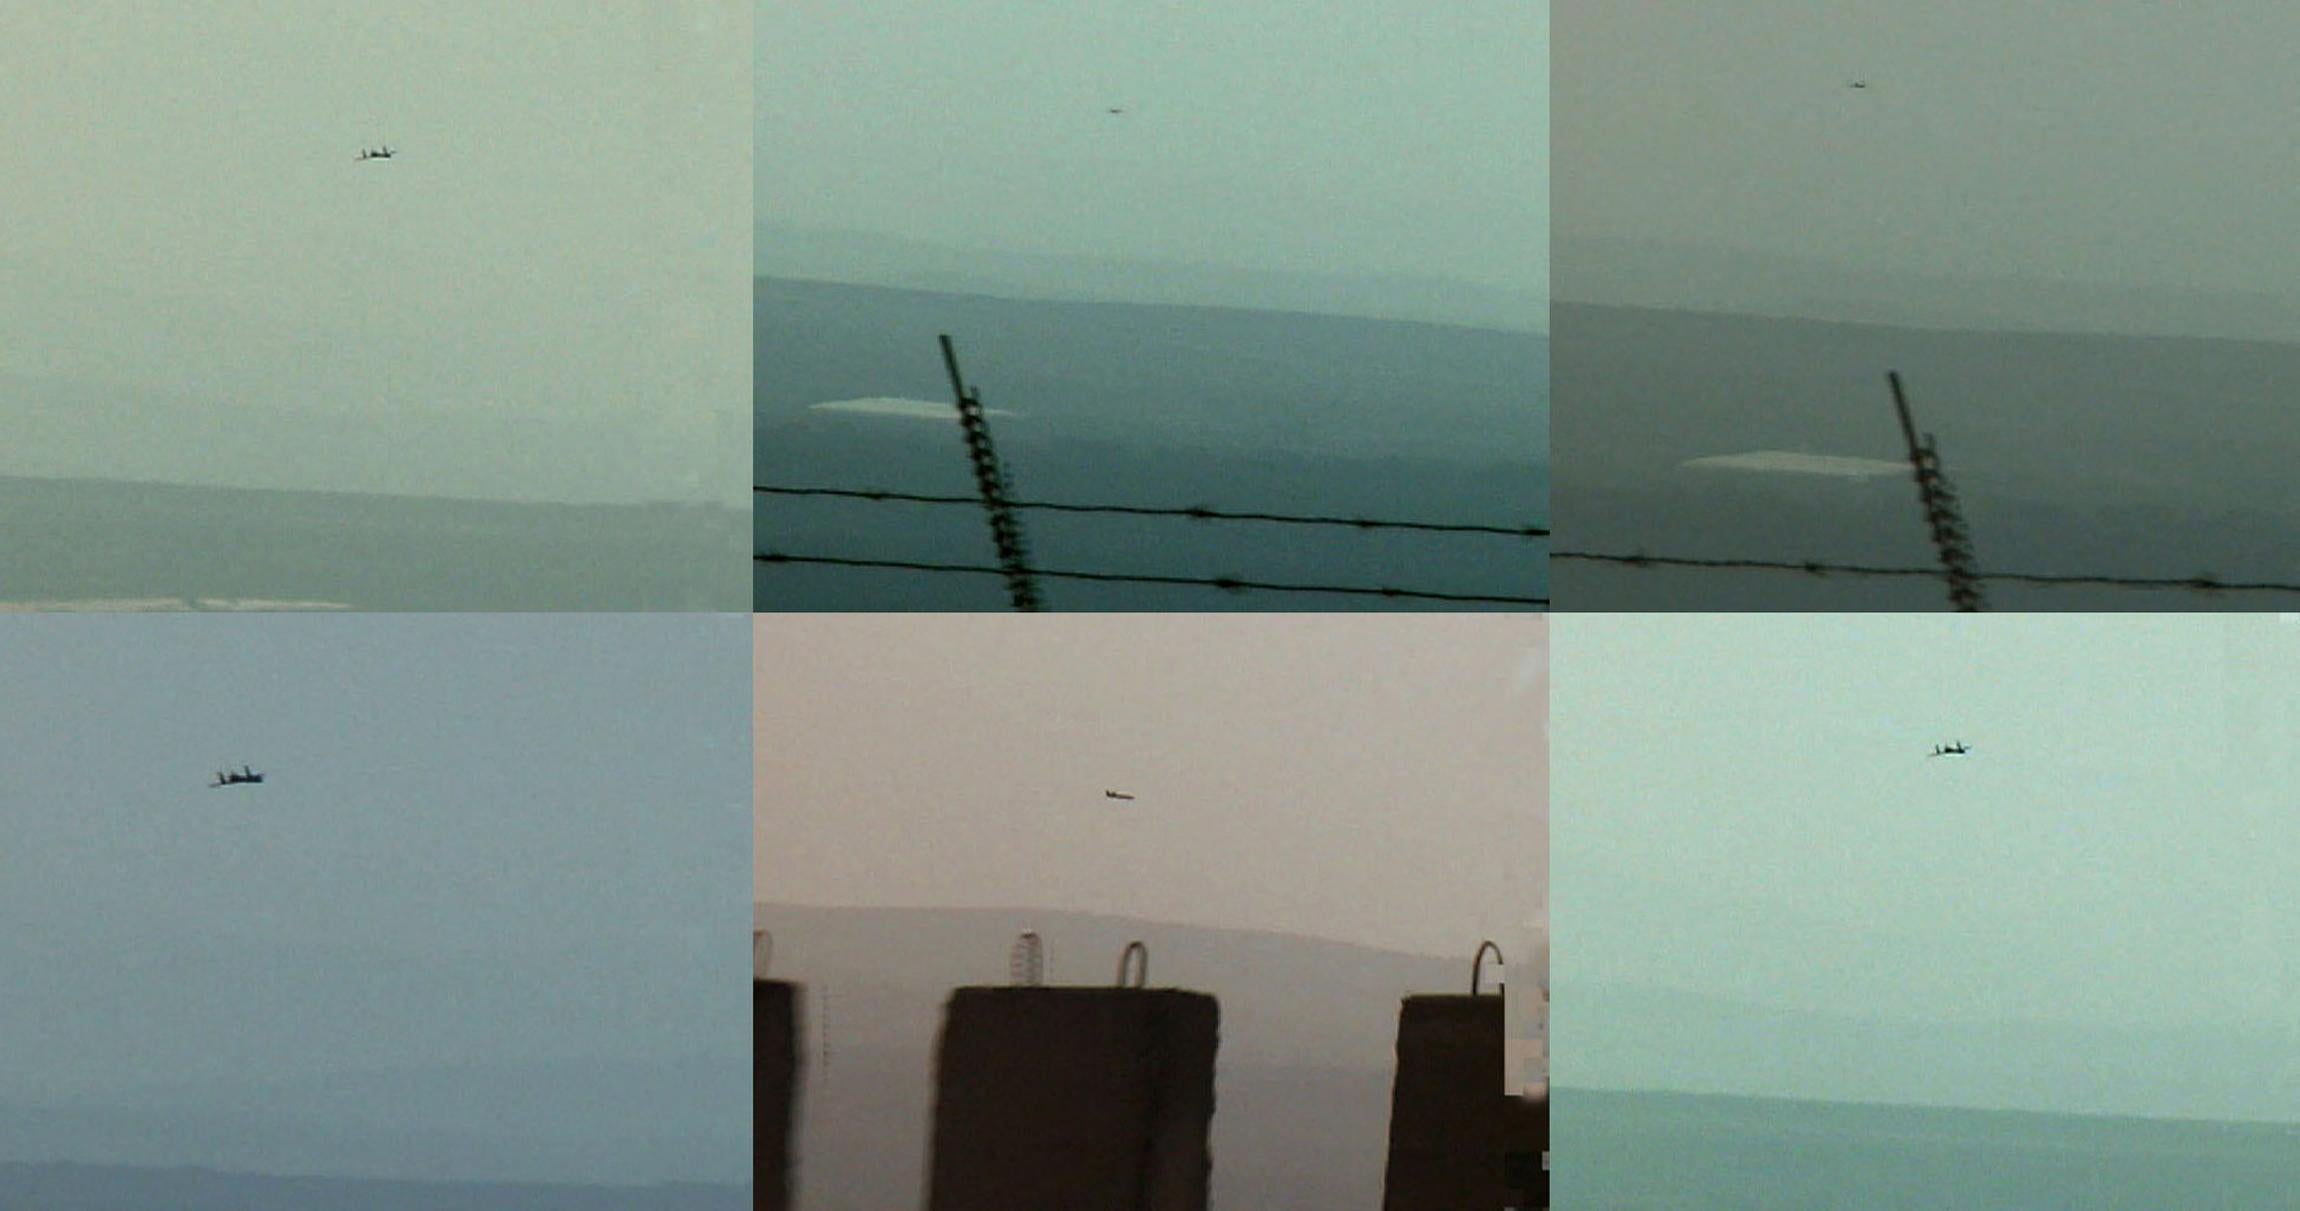 A composite of pictures provided 08 November 2004 by Hezbollah shows an unmanned spy plane flying over Israel. The Lebanese guerrilla group announced 07 November it had sent a drone over "northern Palestine" (Israel) in retaliation for repeated violations of Lebanese airspace by Israel. An Israeli military spokesman confirmed the overflight of its territory saying "this morning, an Iranian UAV operated by the Hezbollah terror organization infiltrated into Israel over the western Galilee." The flight over Israel has deeply embarrassed the Jewish state's air force, which has prided itself for decades on having total control of the region's skies.  AFP PHOTO/HEZBOLLAH/HO (Photo by HEZBOLLAH / AFP) (Photo by -/HEZBOLLAH/AFP via Getty Images)